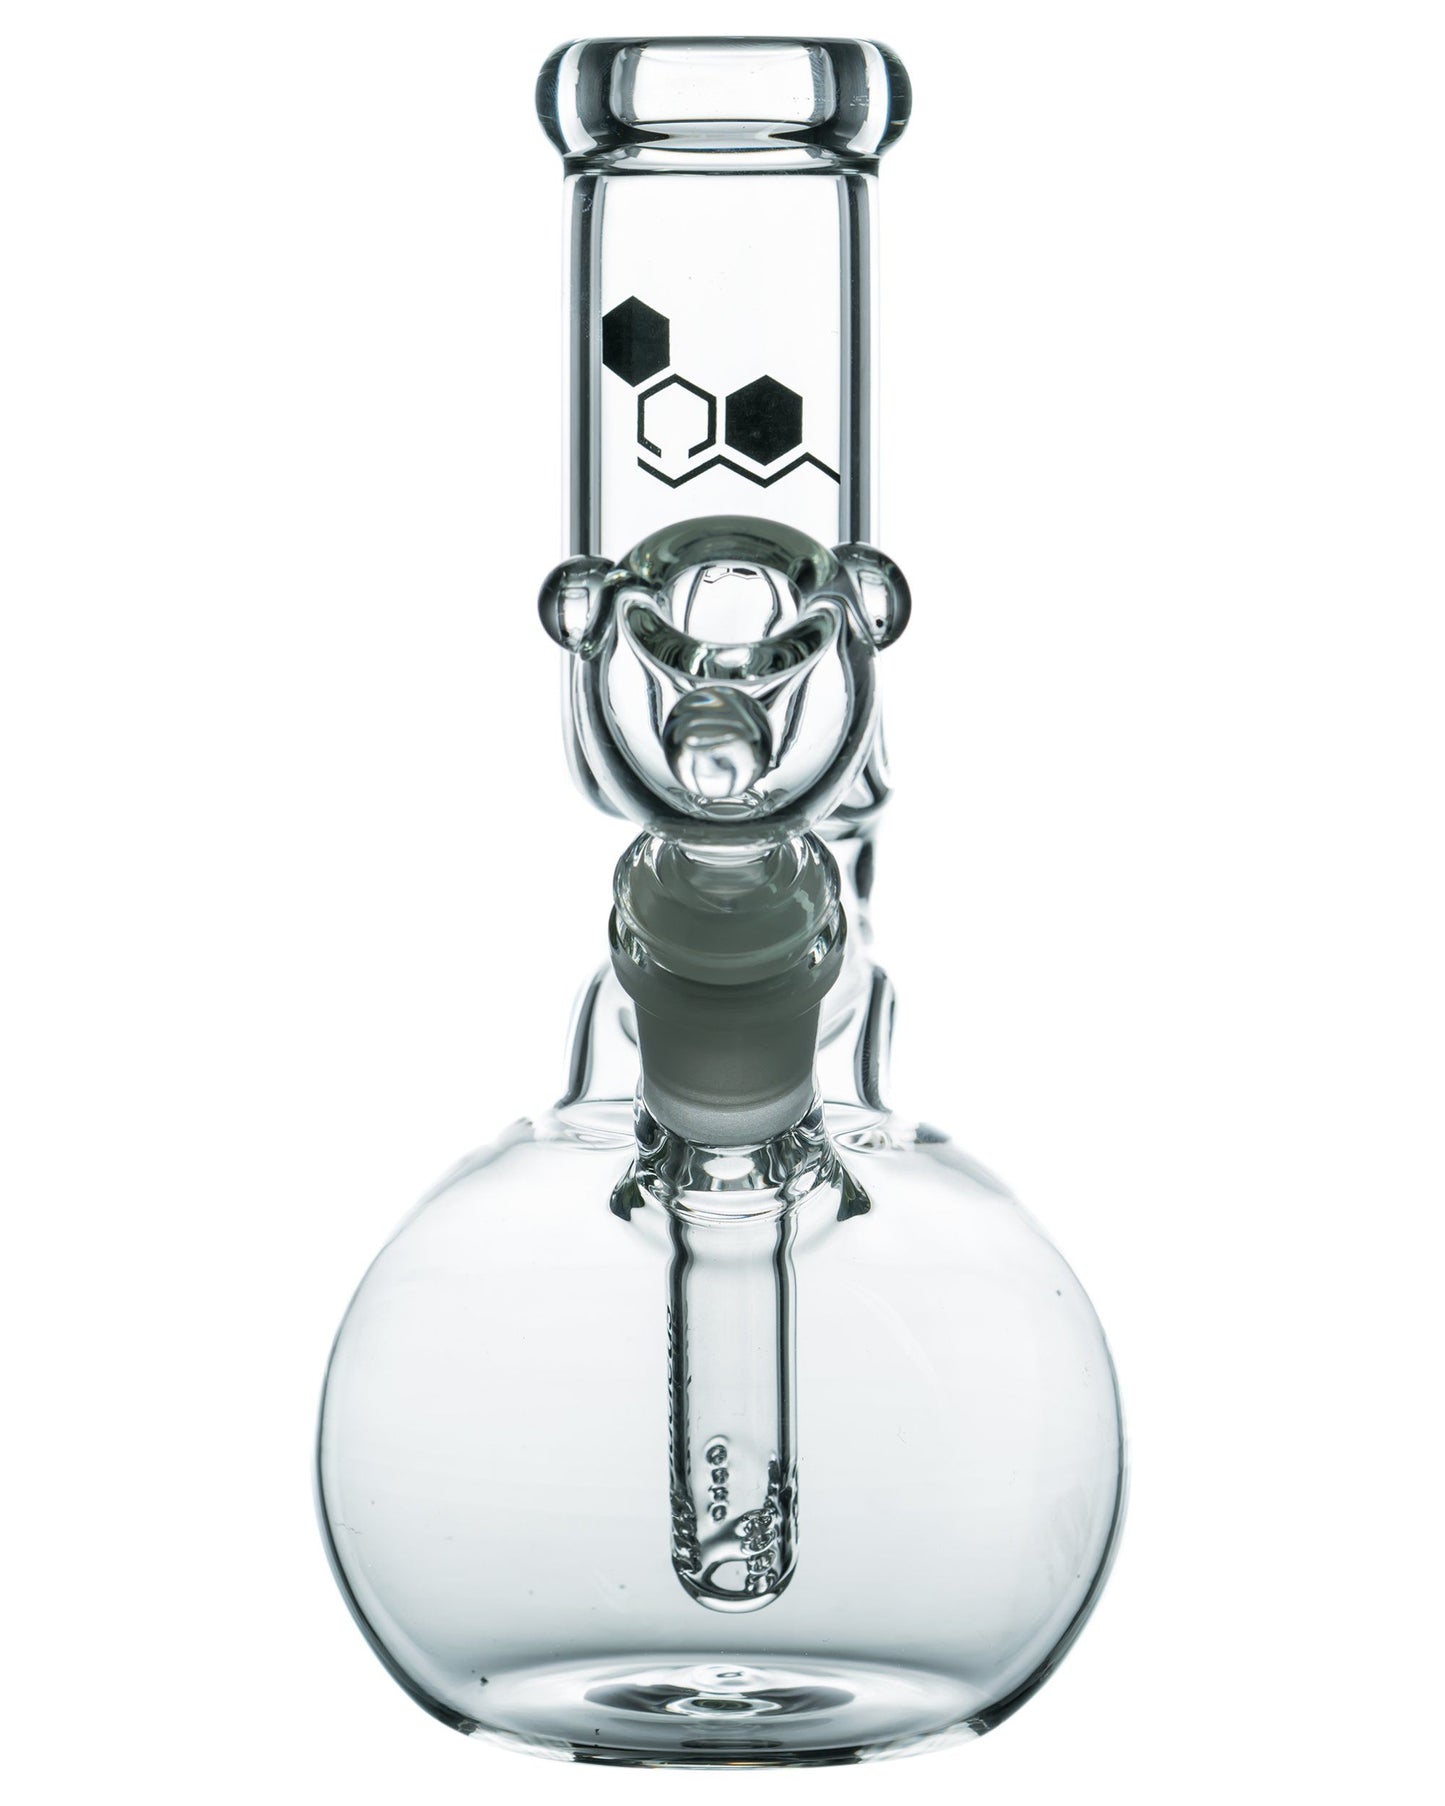 Bubble Base Bong from Nucleus